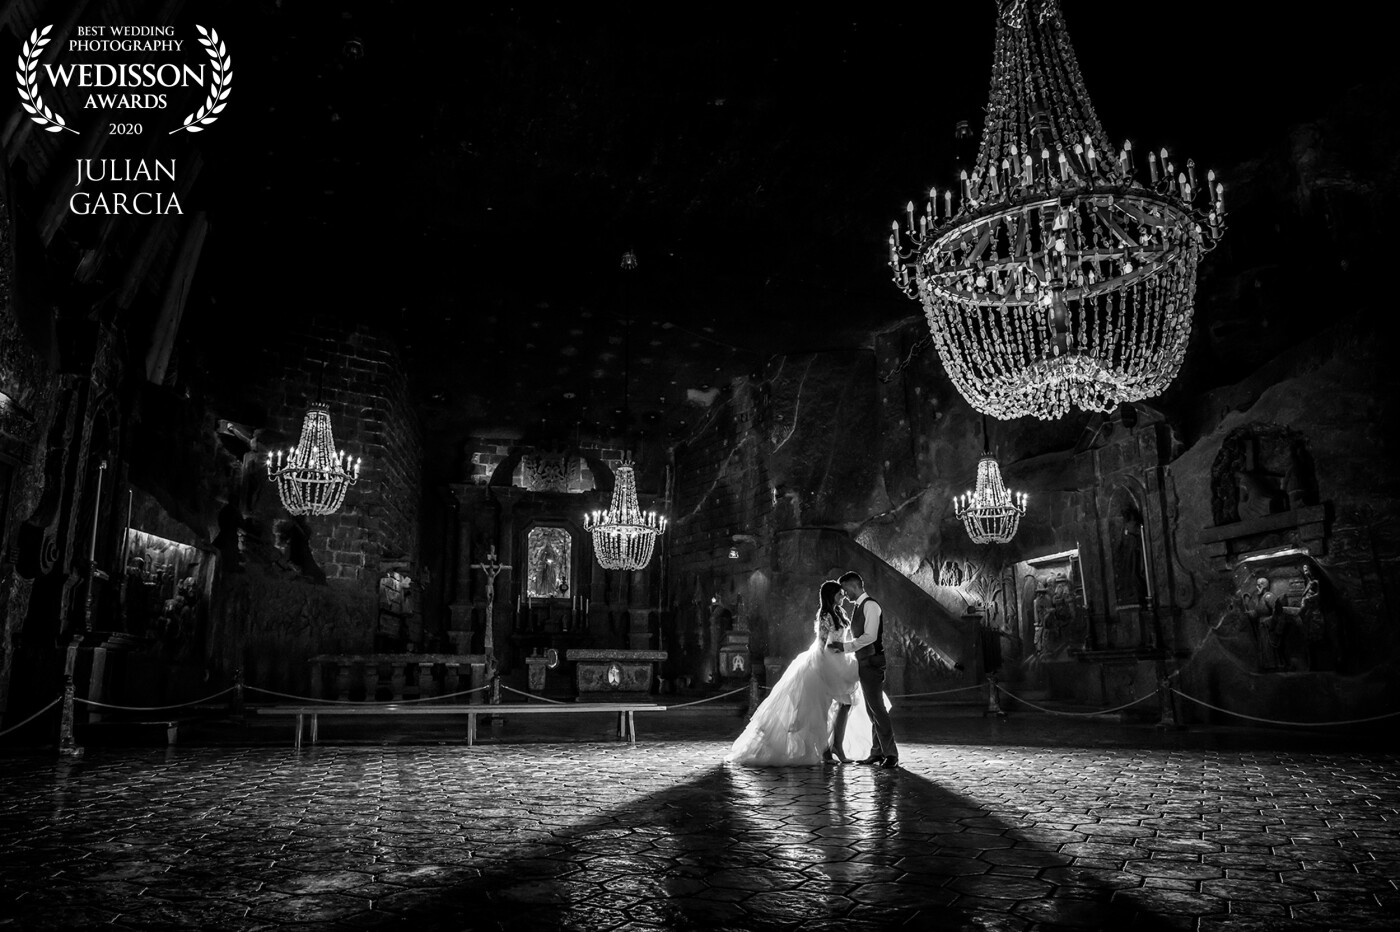 The salt mines of Krakow is a fairytale place, the bride's dress was great to capture the moment and be able to move to Disney tales where the princesses dance for the guests to see, I am still fascinated by the beauty of the place .